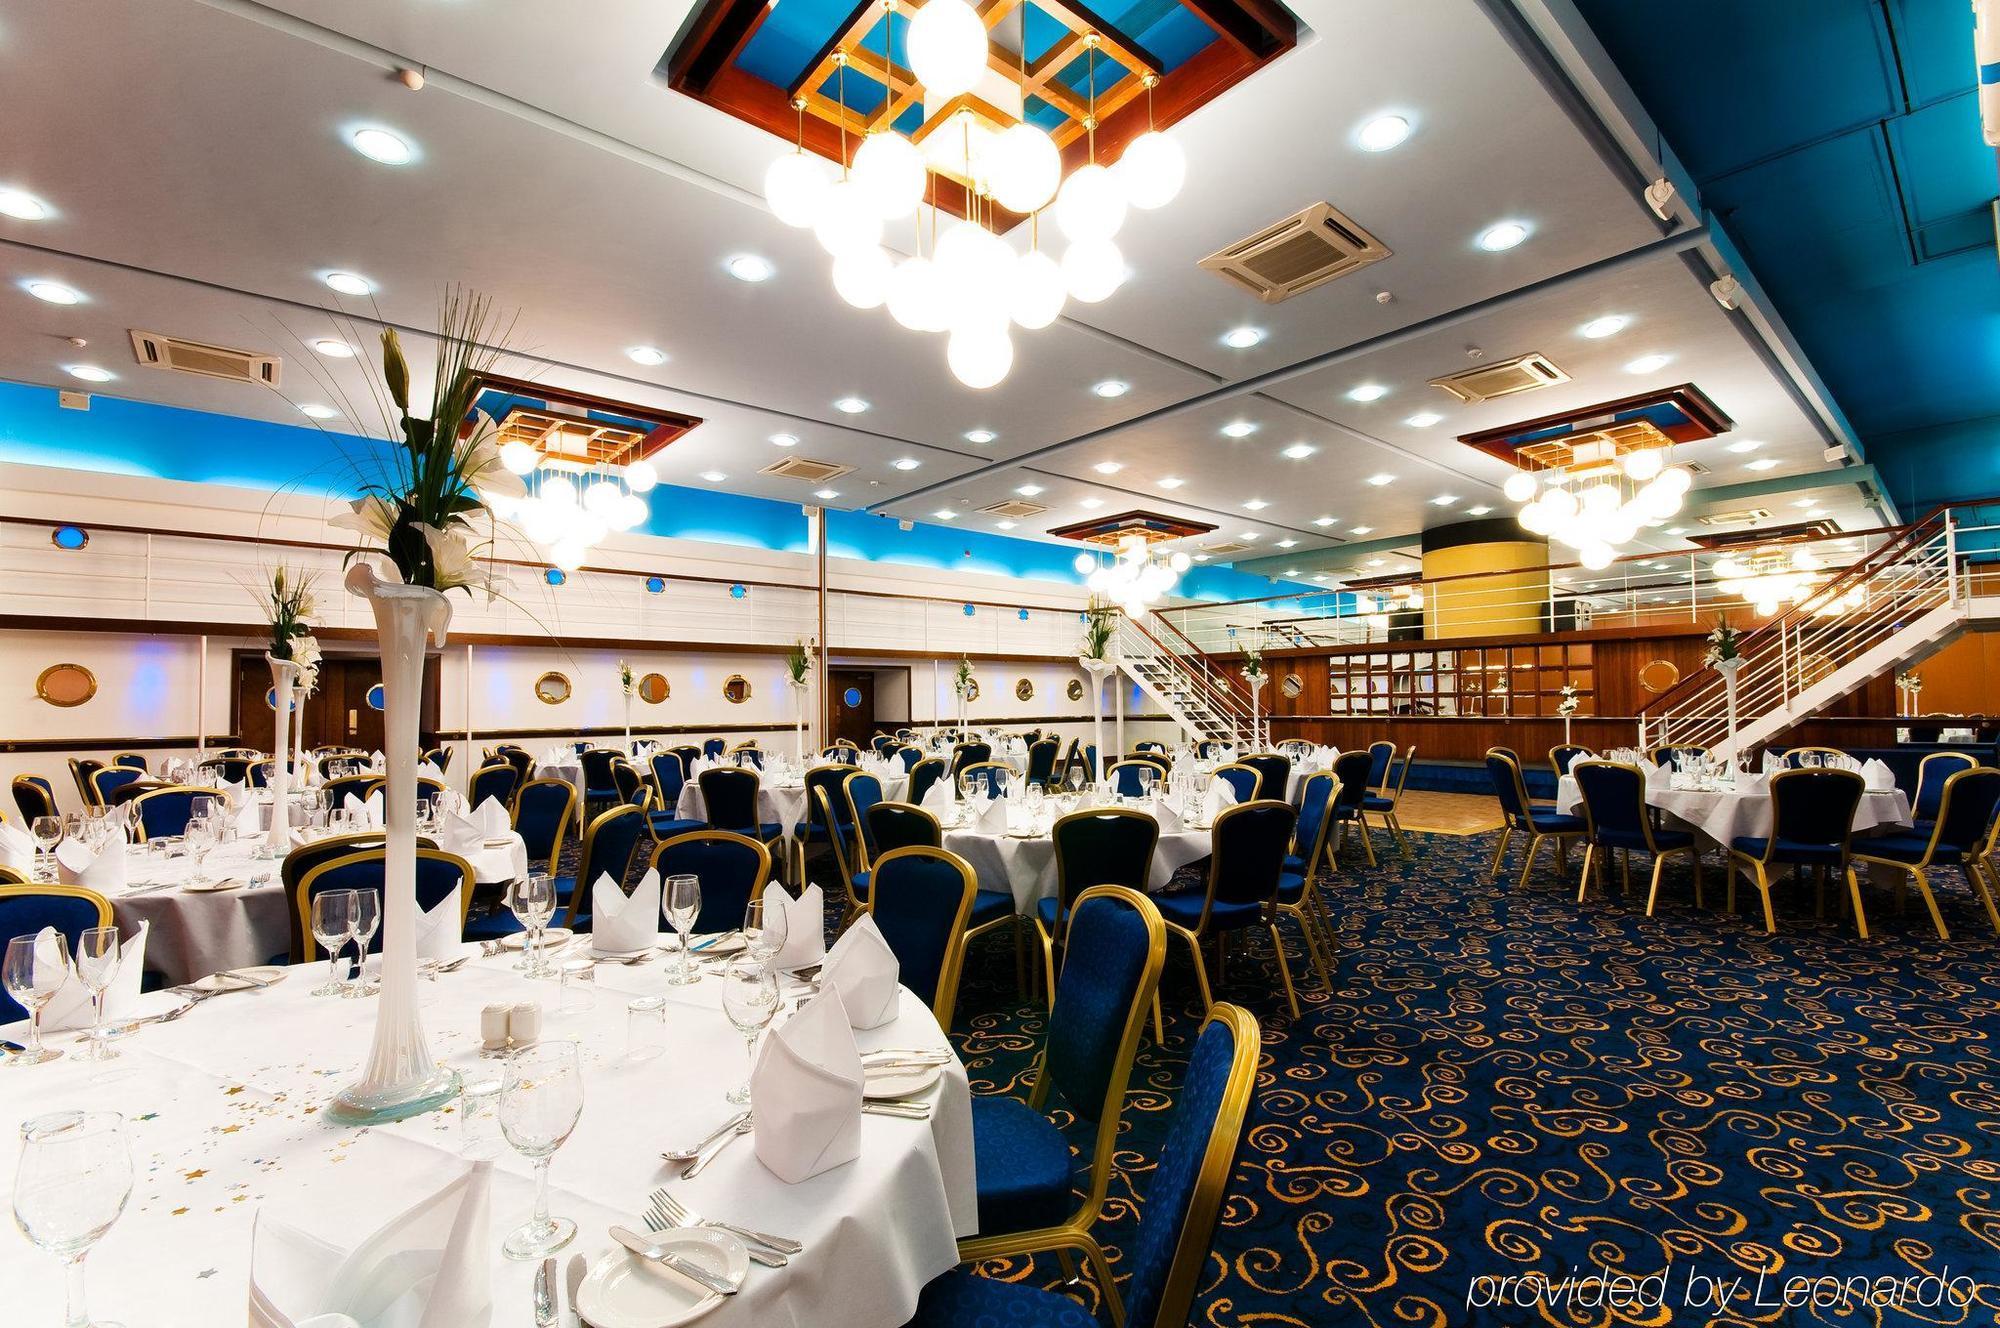 The Liner At Liverpool Restaurant photo